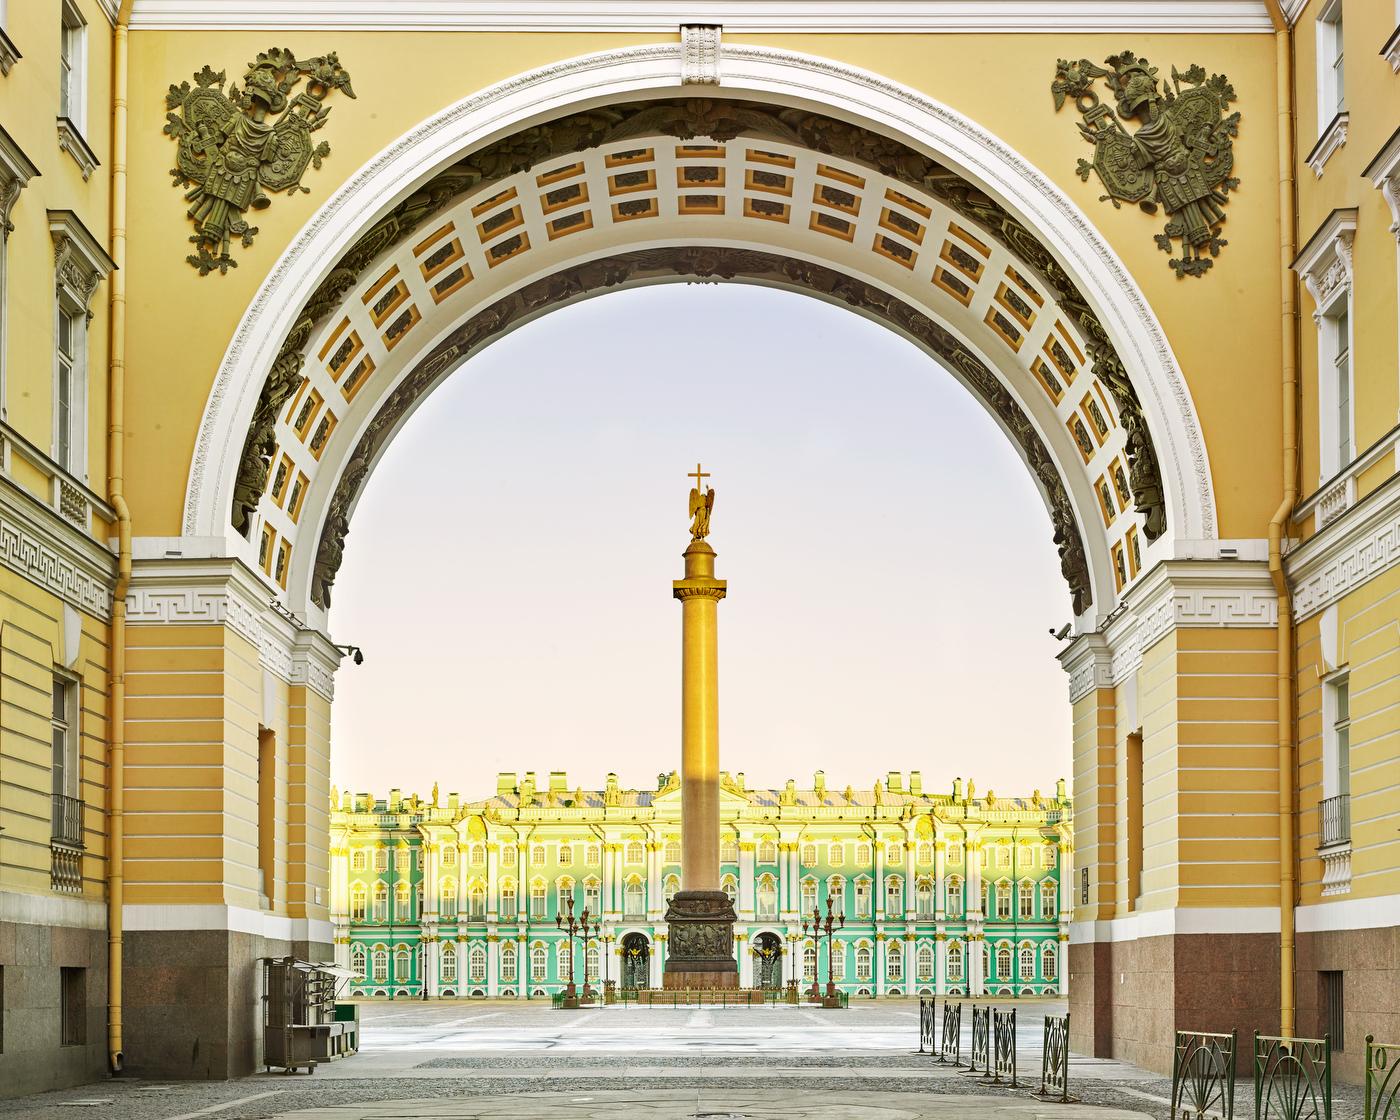 Palace Square, St Petersburg, Russia (21” x 26”)